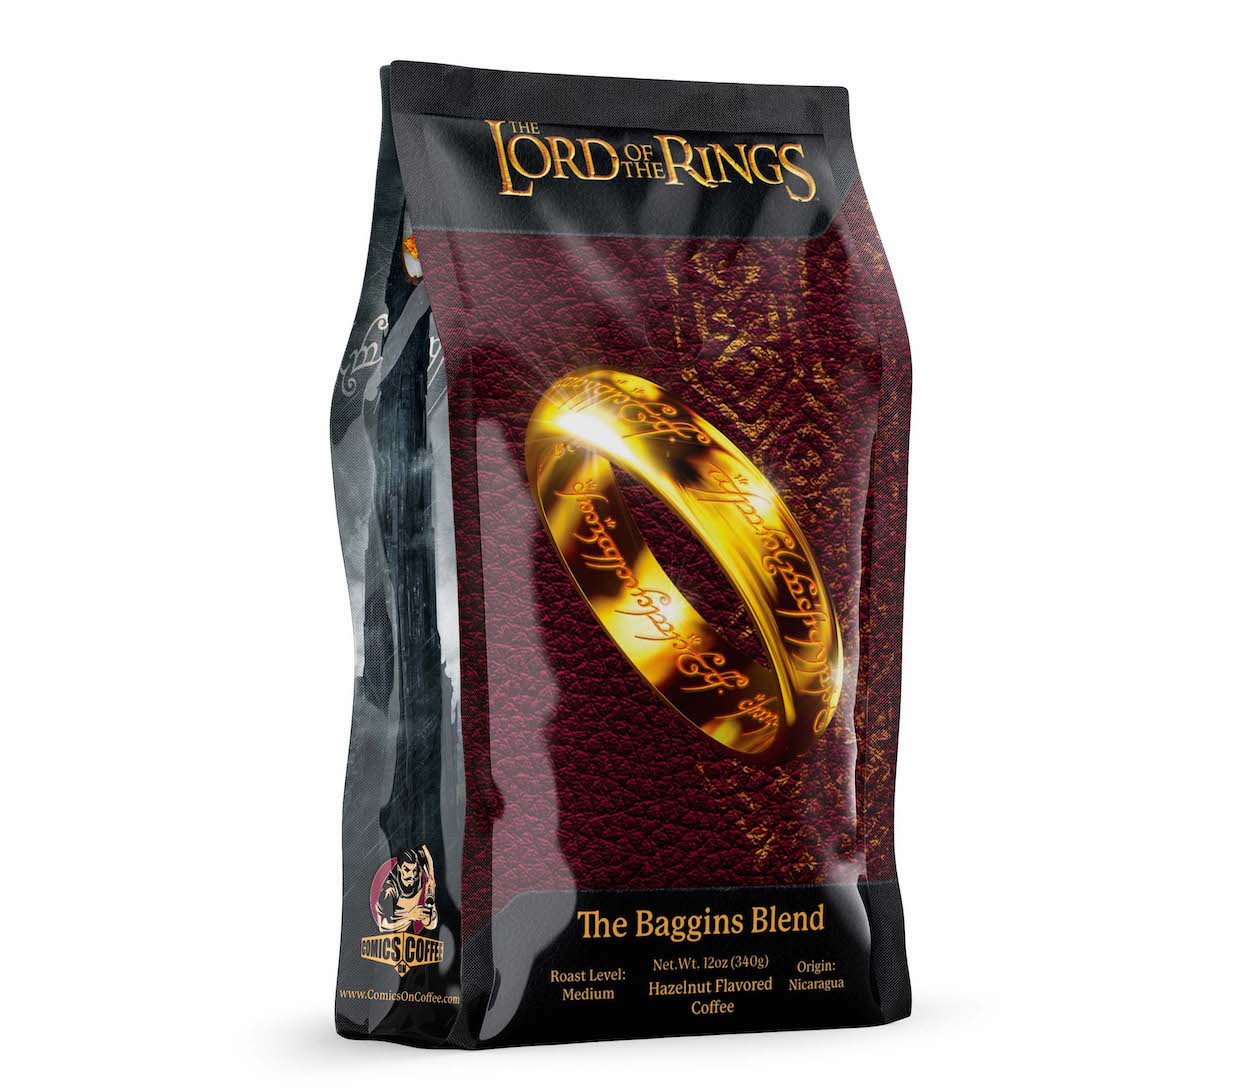 Lord of the Rings coffee